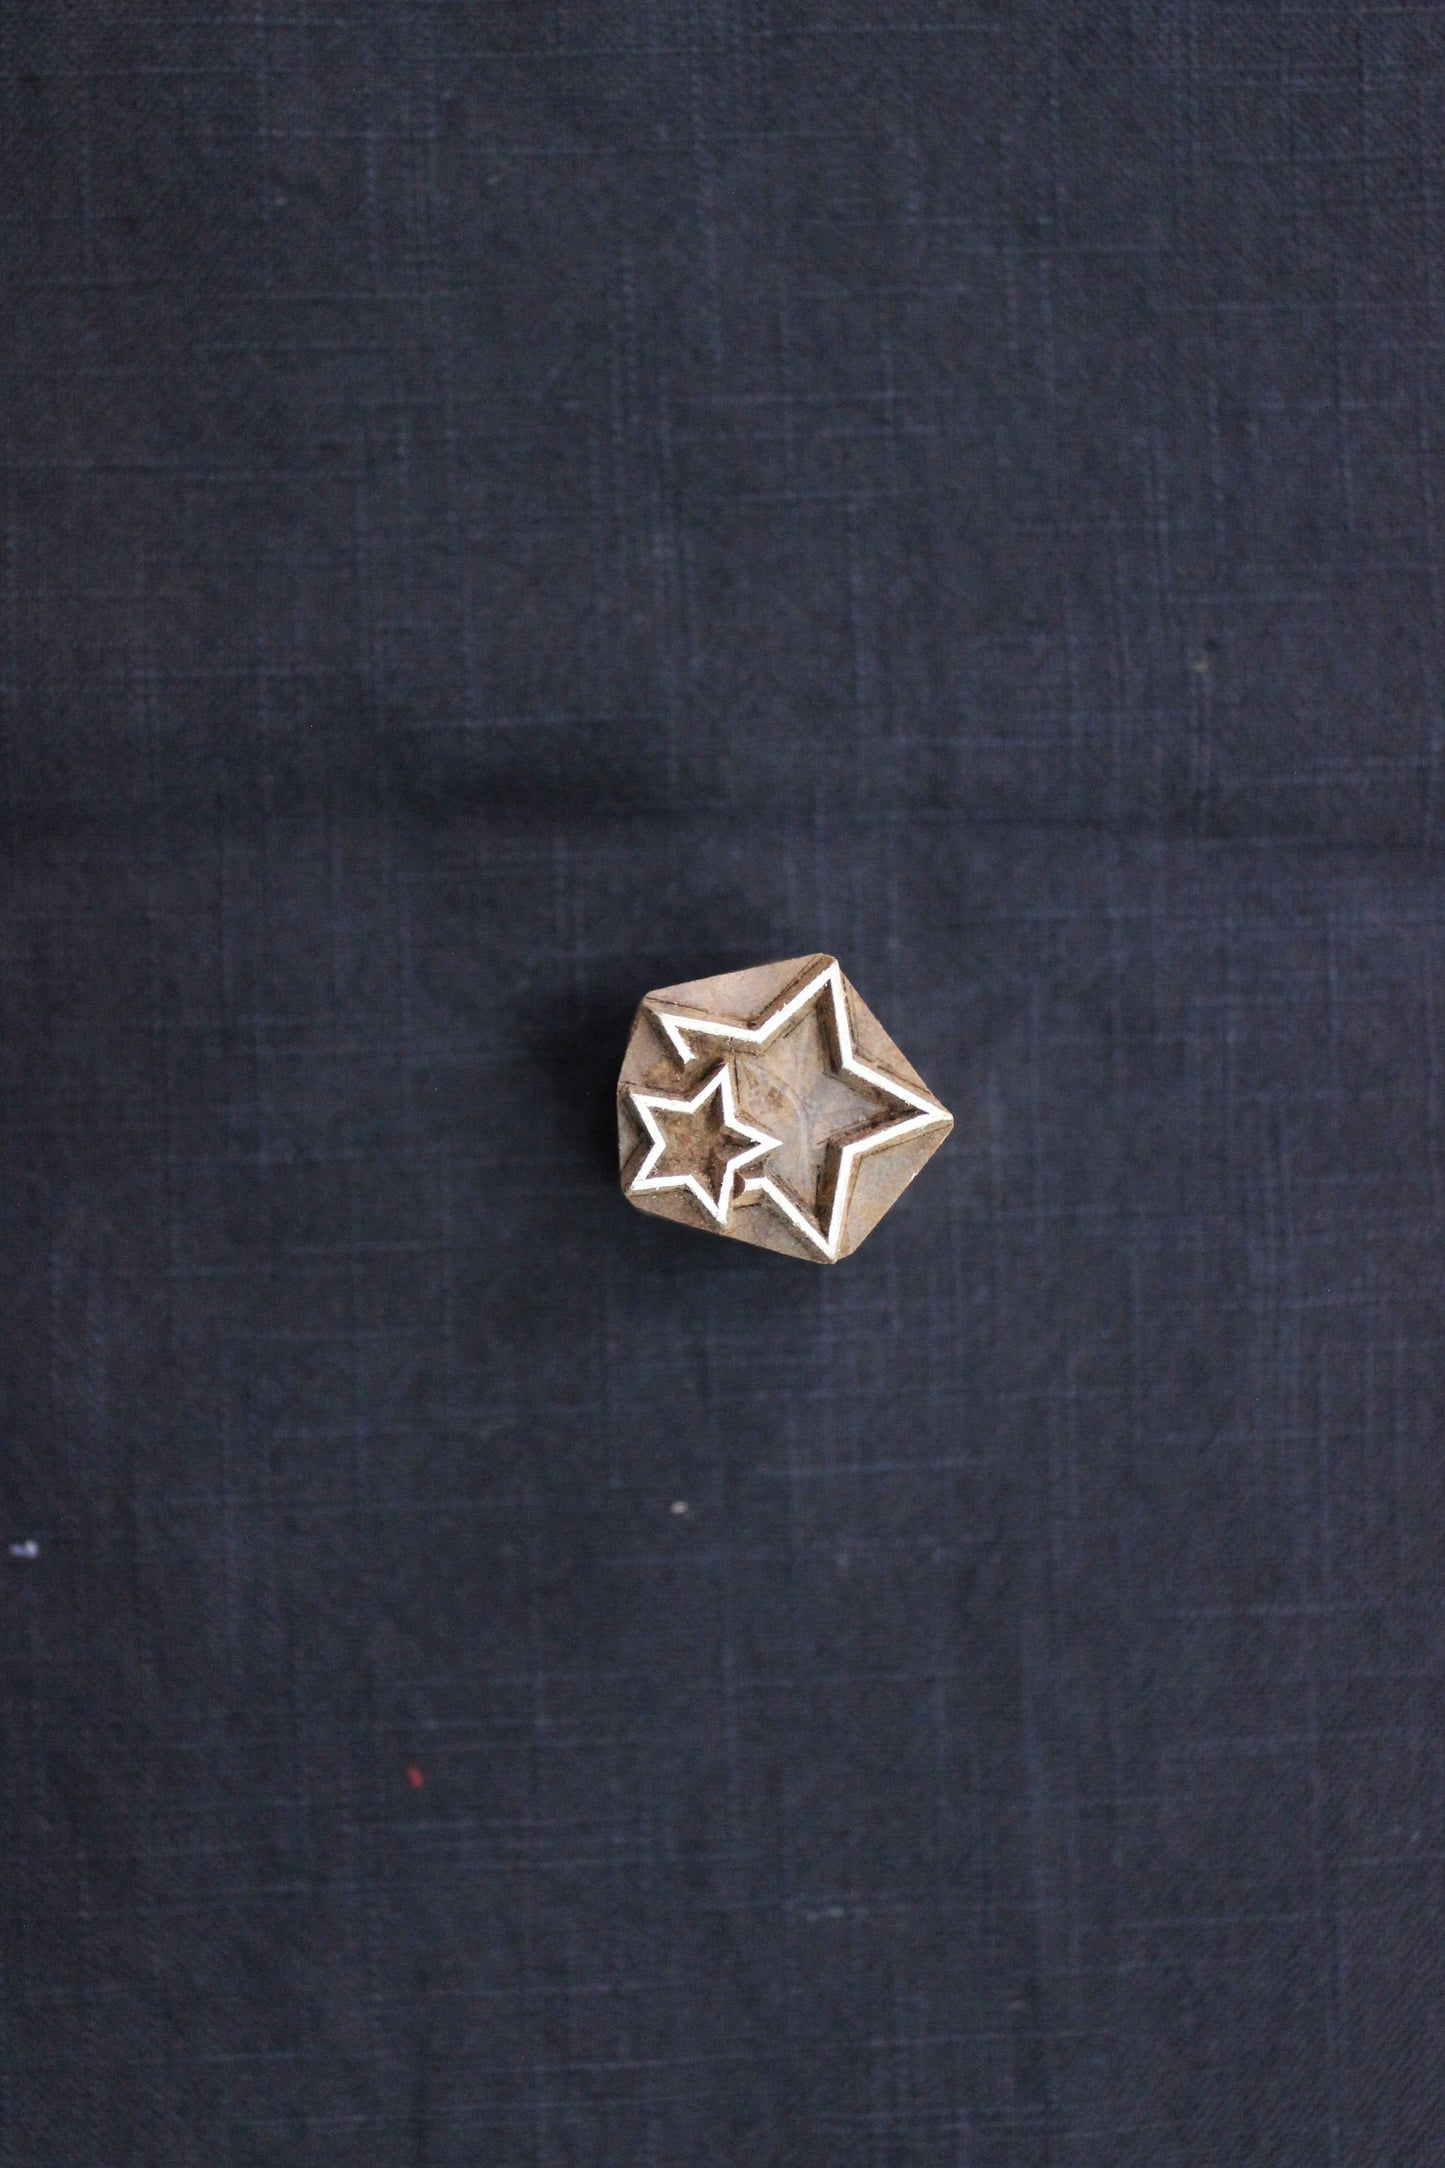 Star Fabric Stamp Hand Carved Block Print Stamp Handmade Stamp Hand Carved Wooden Stamp For Printing Hand Carved Soap Stamp Traditional Wooden Block